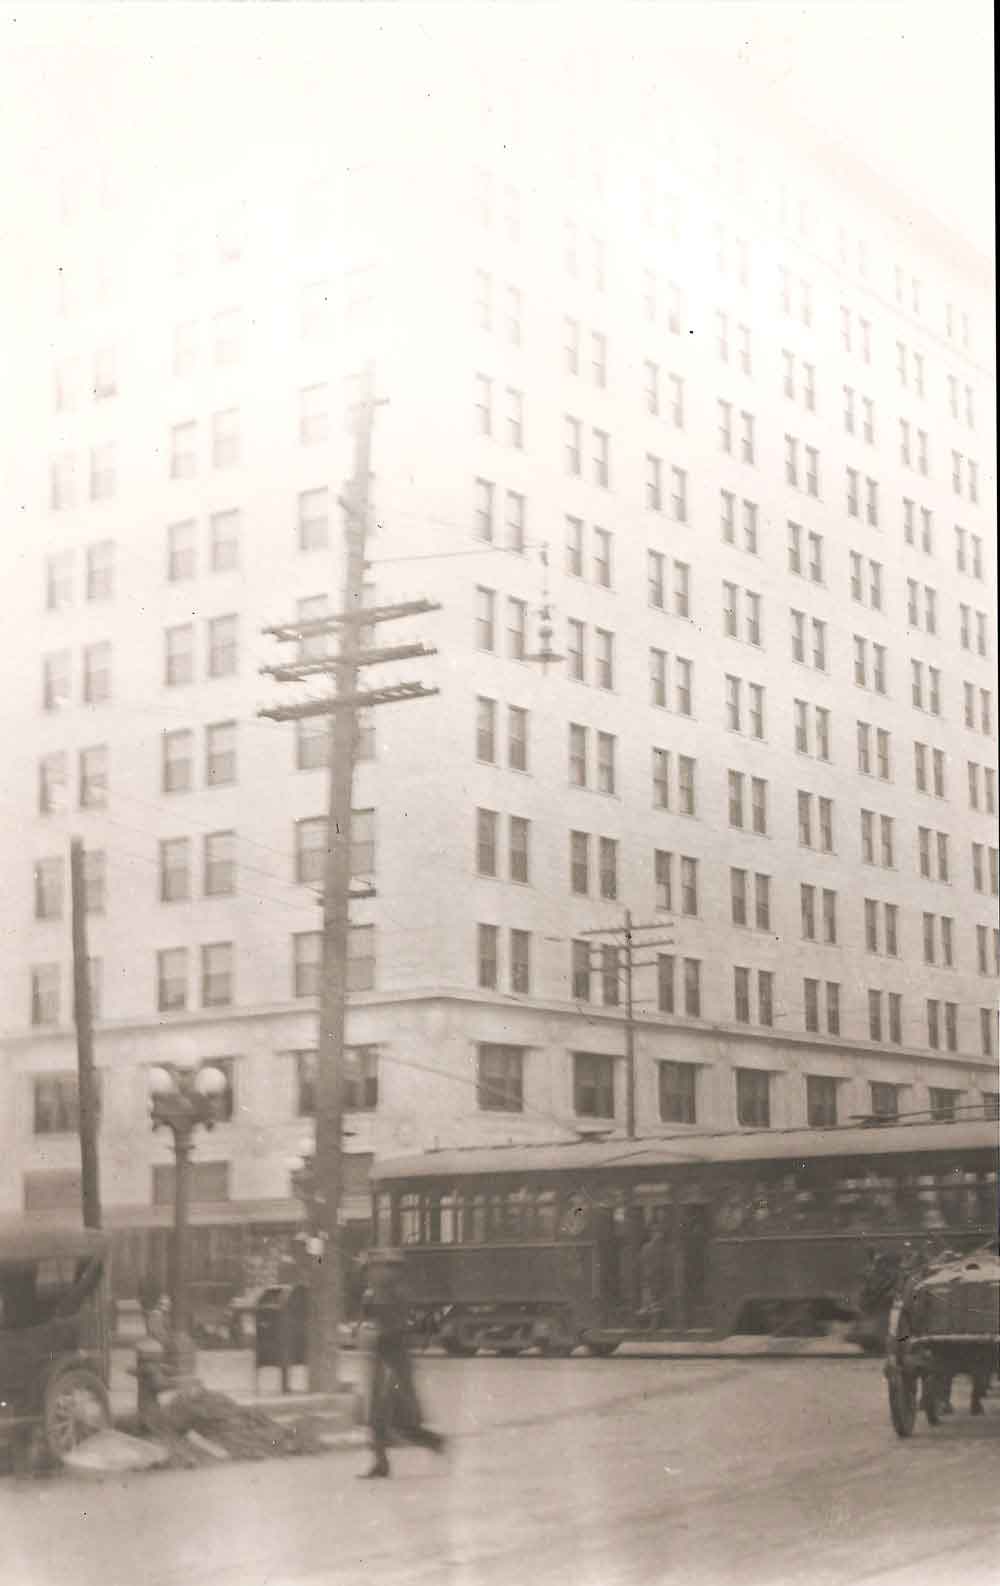 (RAC.2010.07.07) - Colcord Building, 1 N Robinson, View Northwest from Intersection of Grand and Robinson, c. 1910s